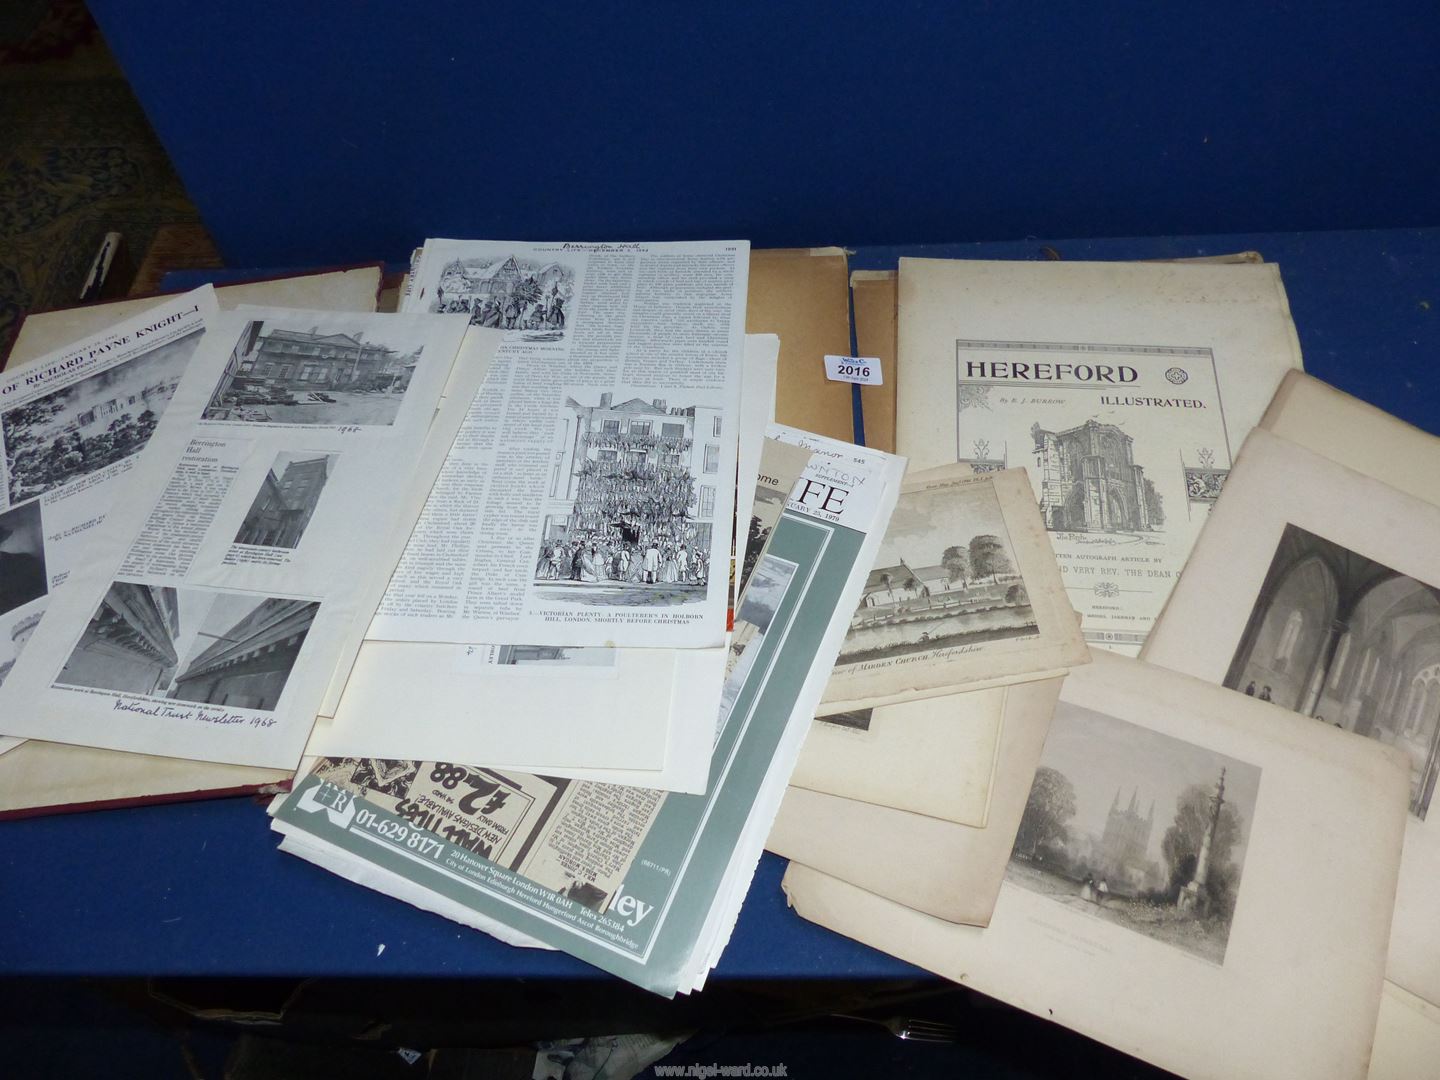 Herefordshire illustrated and cuttings from Country Life Magazines.